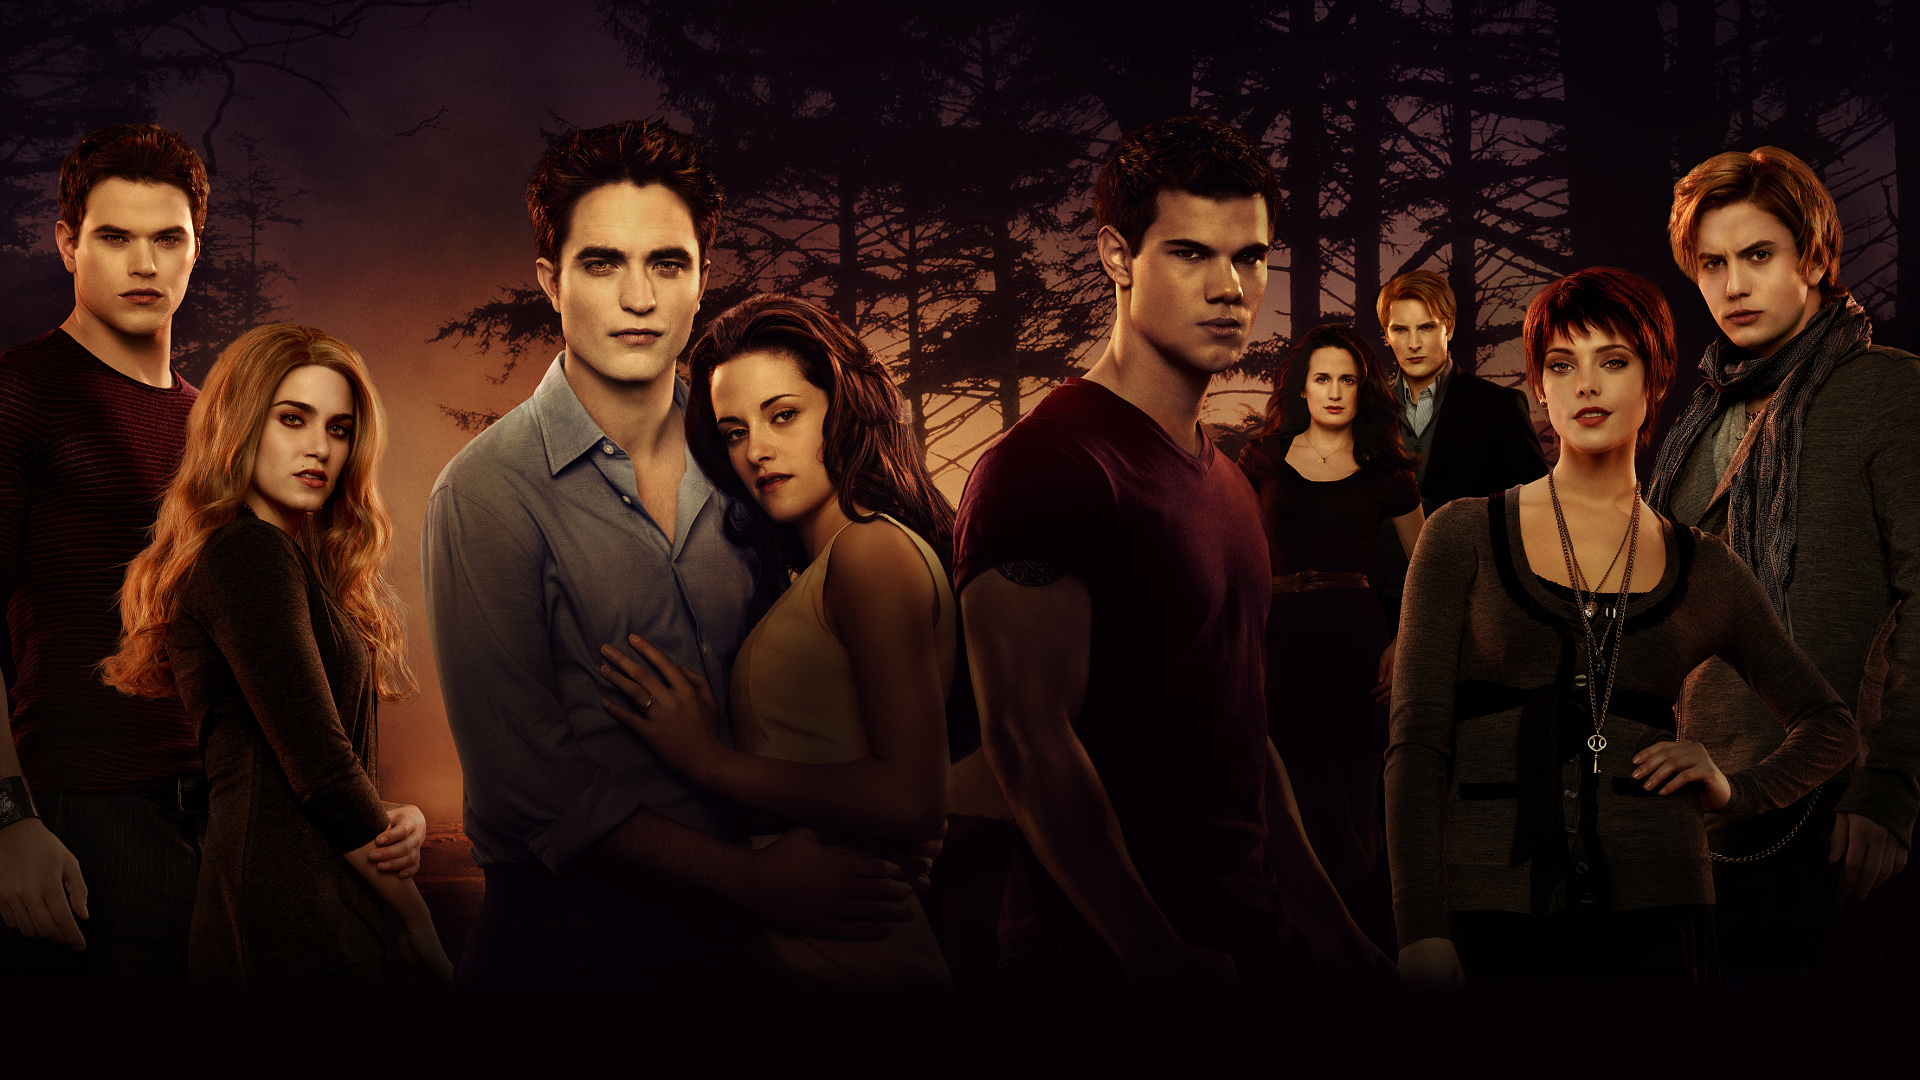 download the new for apple The Twilight Saga: Breaking Dawn, Part 2